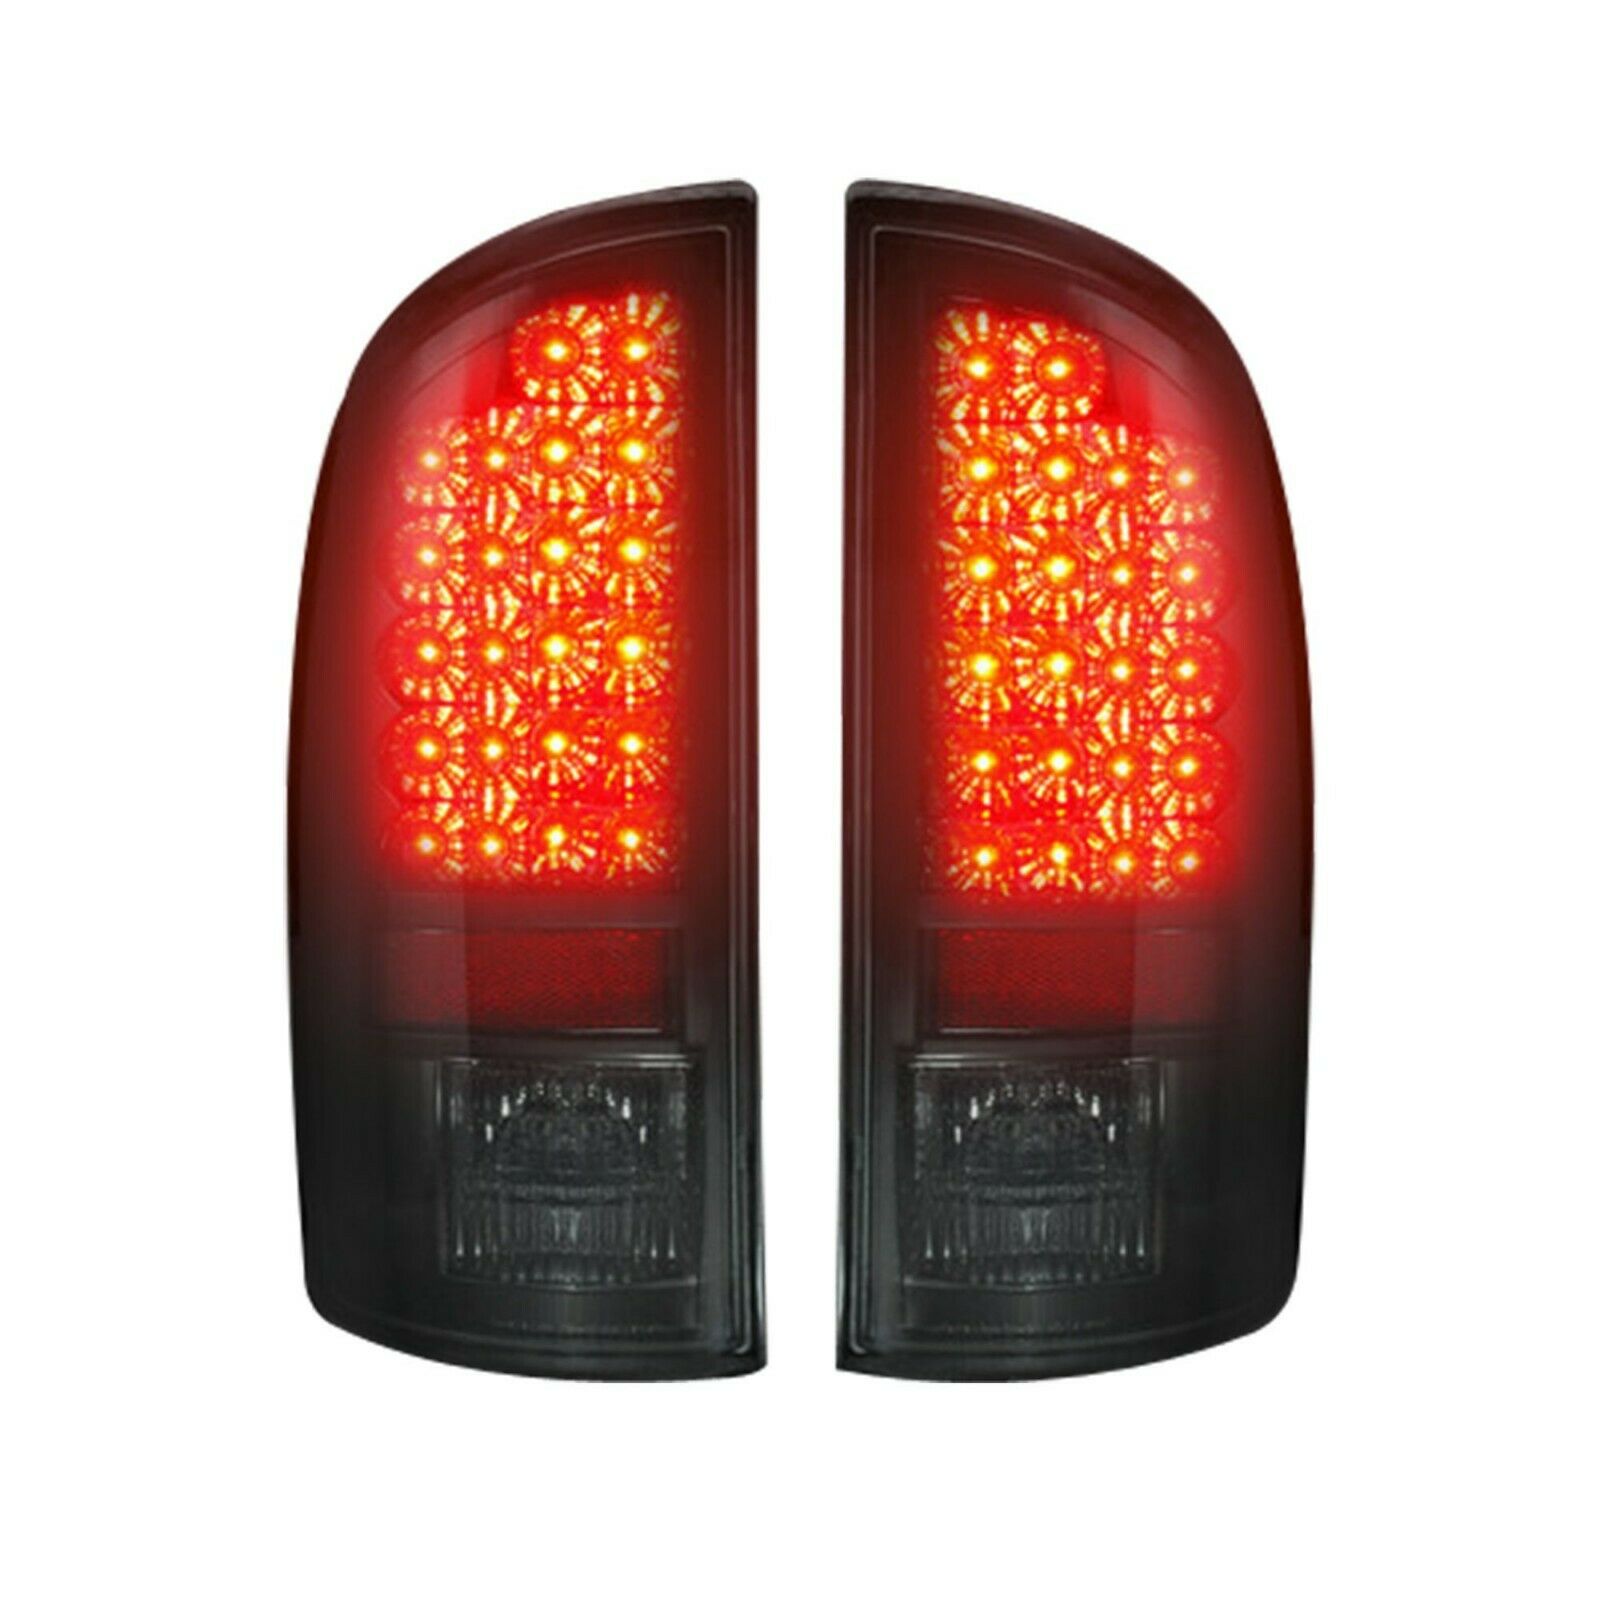 Recon SMOKED LED Tail Lights Fits 2002-2006 Dodge RAM - 264171BK